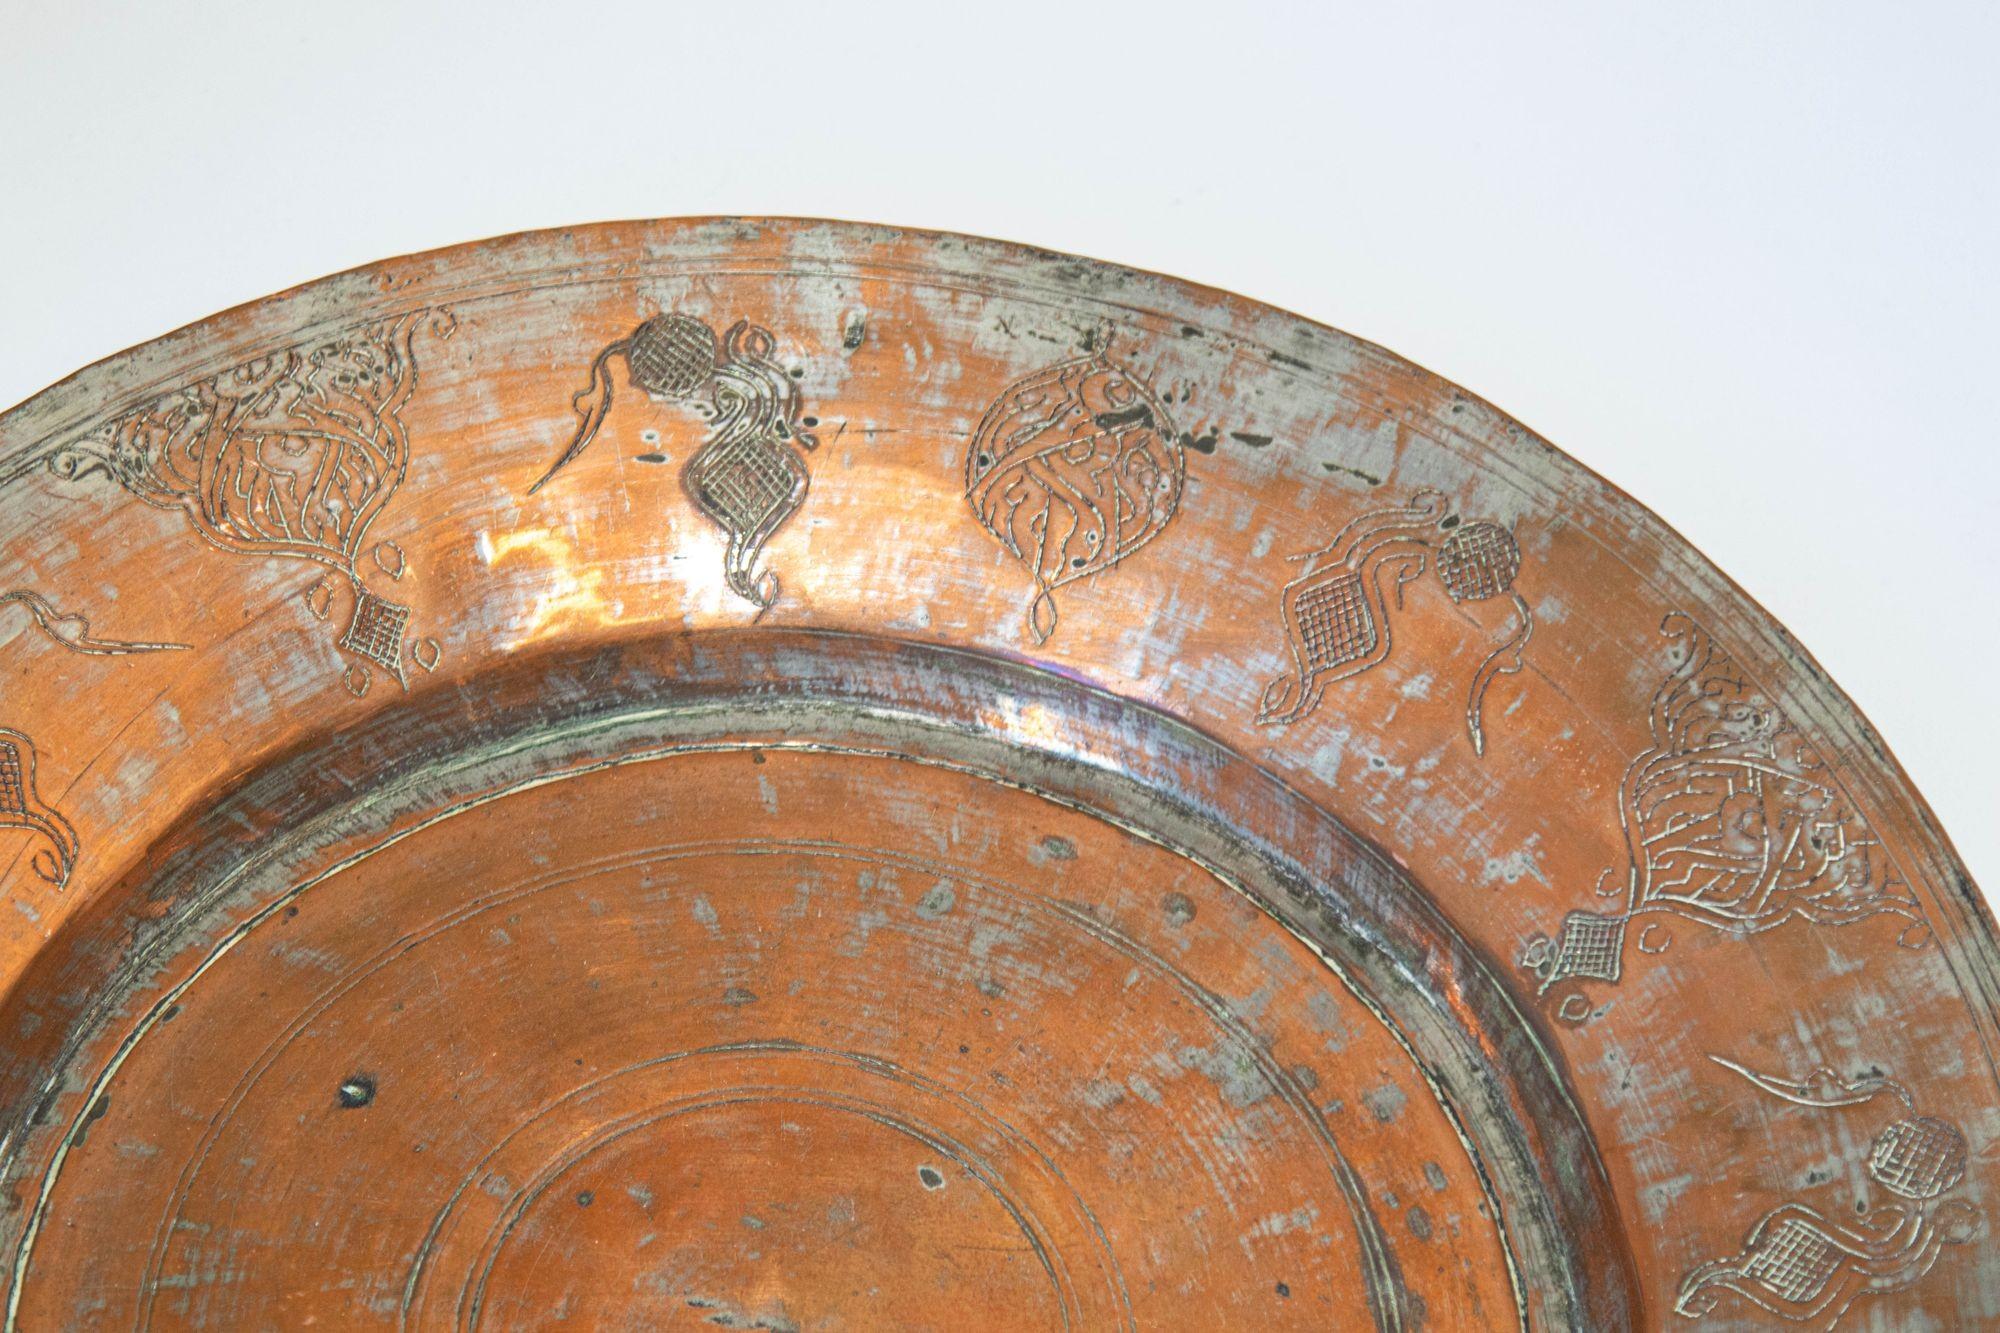 20th Century Large Antique Tinned Copper Rajasthani Vessel Bowl